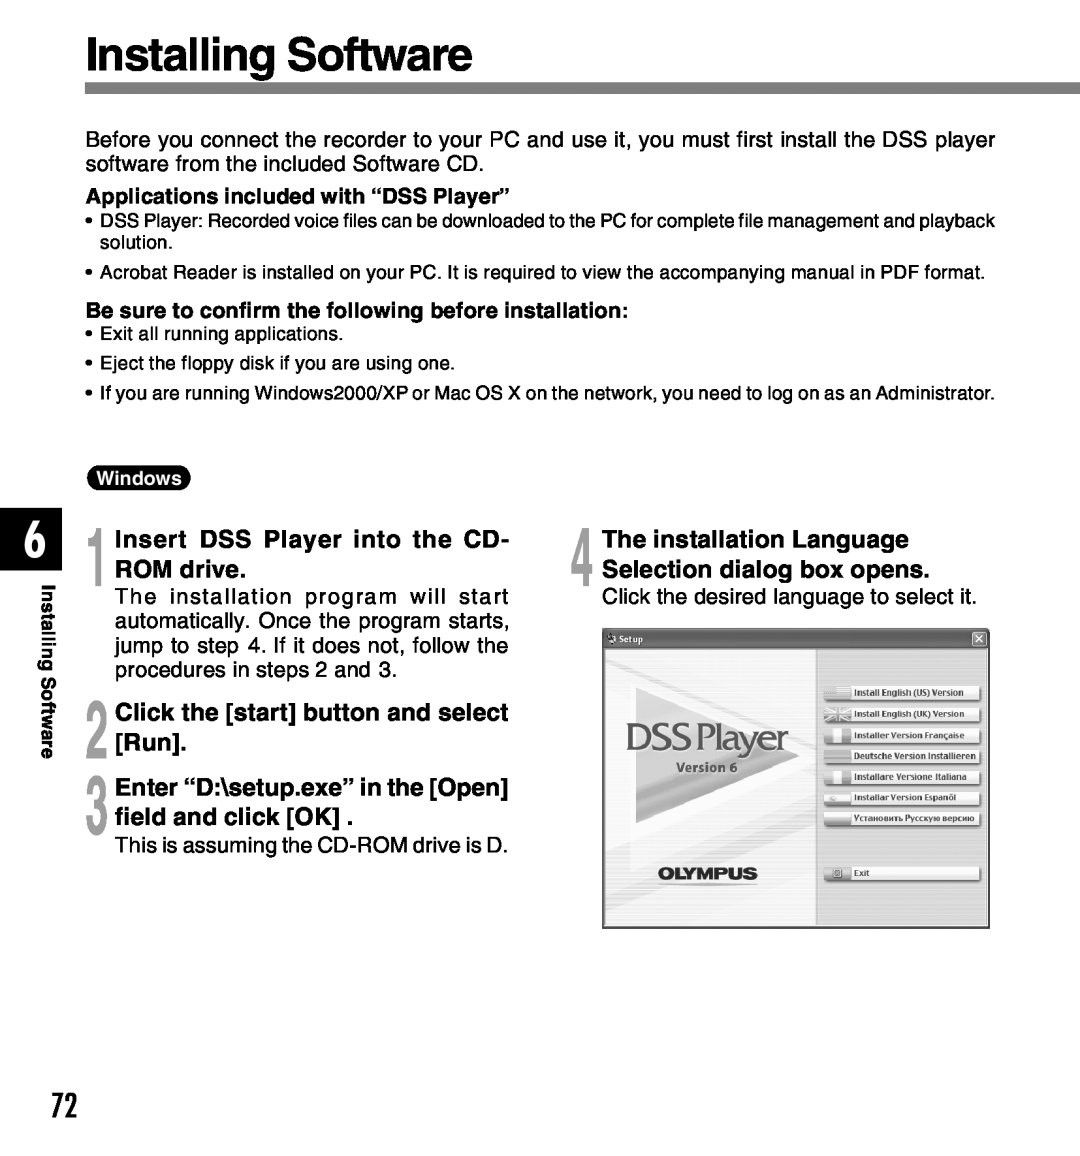 Olympus manual Installing Software, 1Insert DSS Player into the CD- ROM drive, 2Click the start button and select Run 